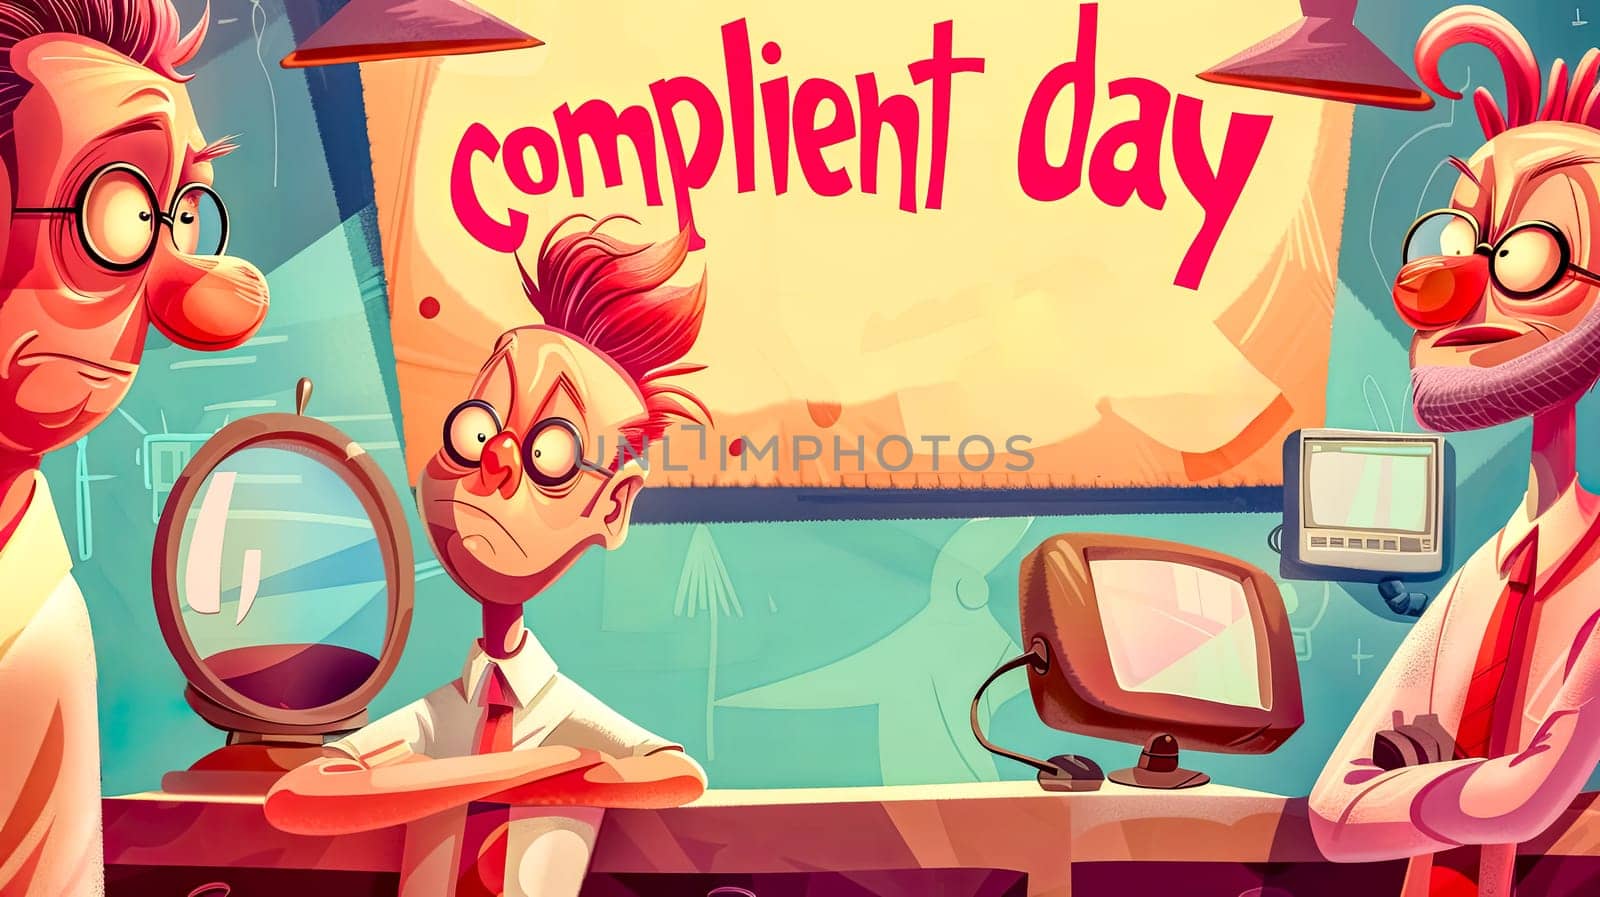 Compliment day office cartoon illustration by Edophoto